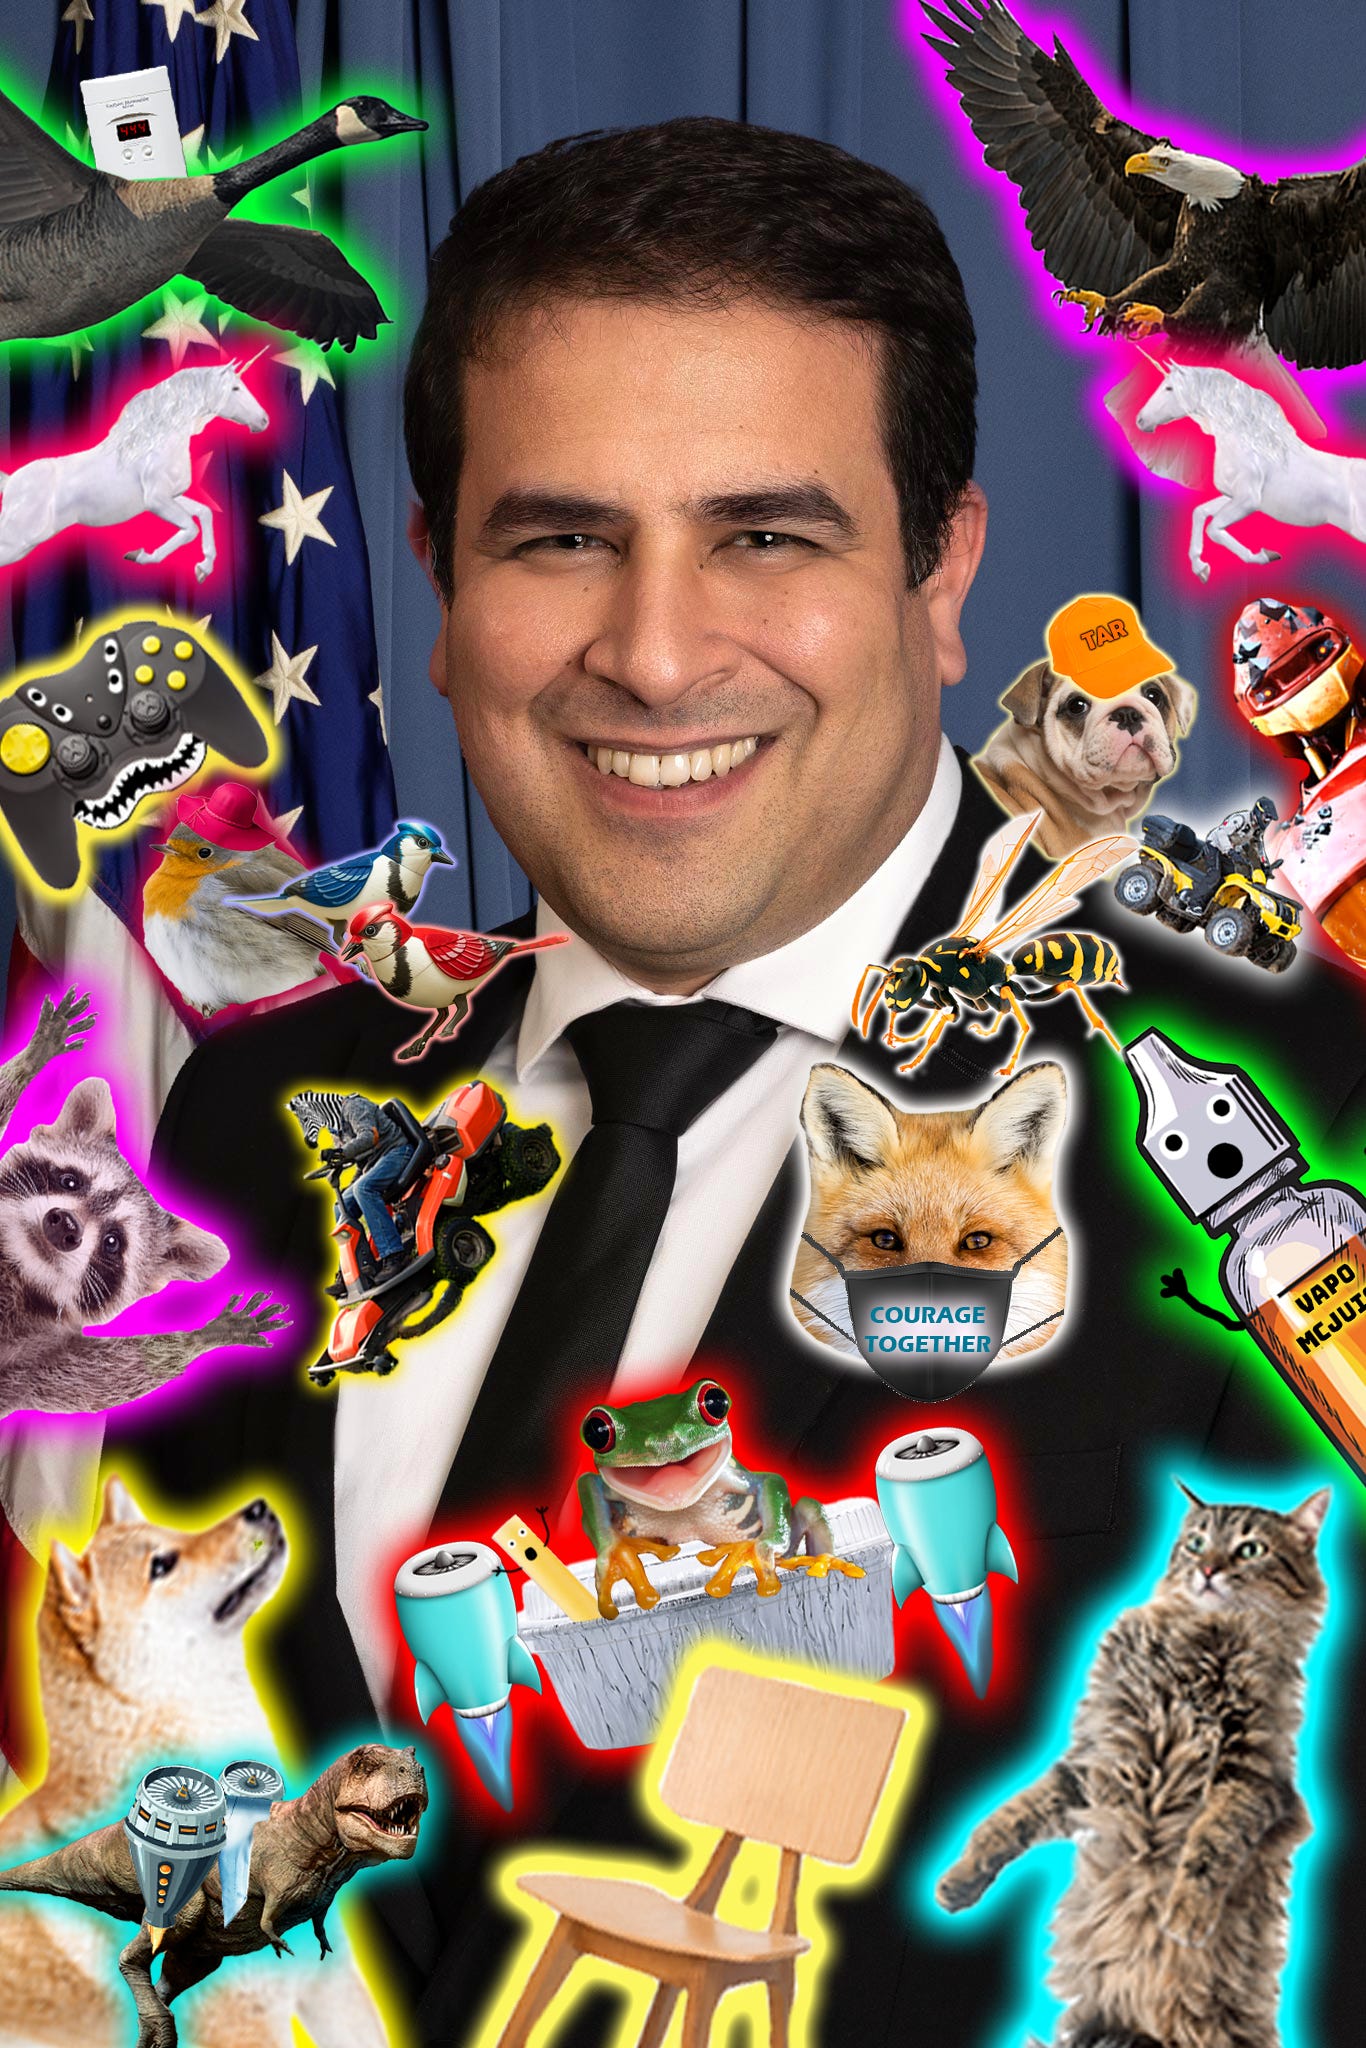 Photo of USCPSC social media specialist Joseph Galbo surrounded by photoshopped characters like a unicorn, raccoon, birds, and more meant to represent the characters he creates for the social accounts.